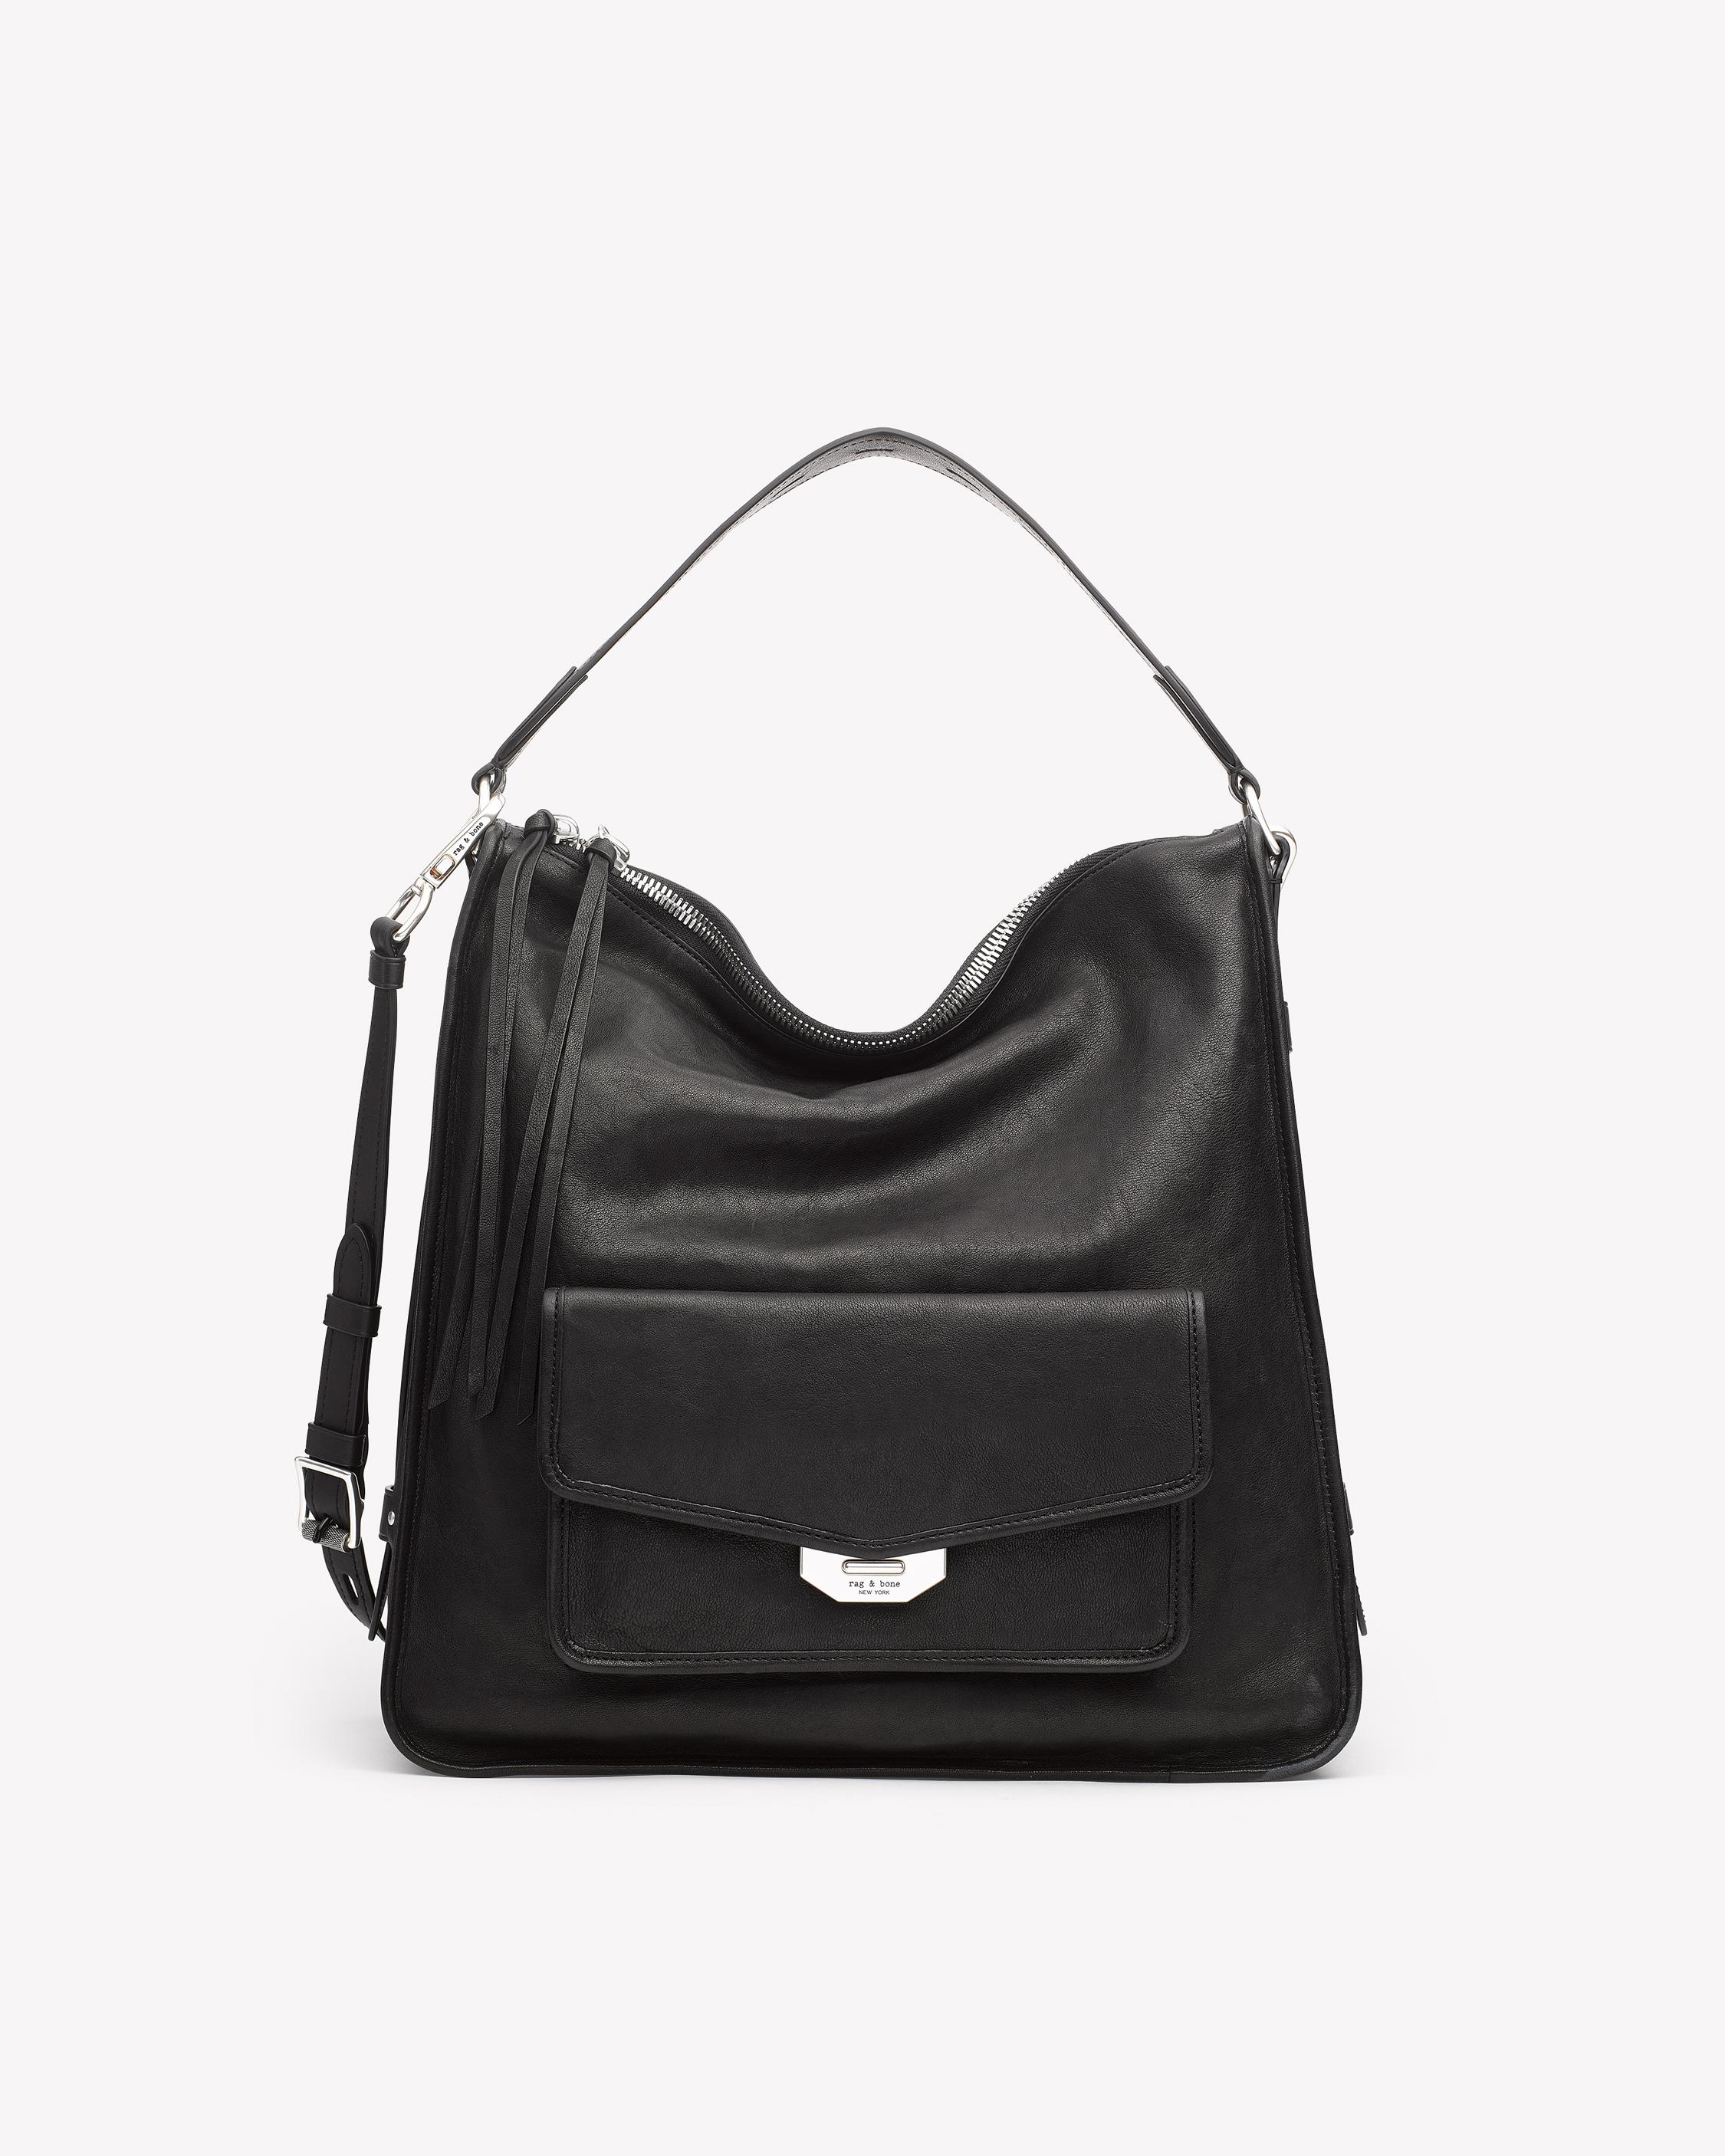 Handbags & Backpacks: Leather to Denim to Crossbody with Urban Style ...